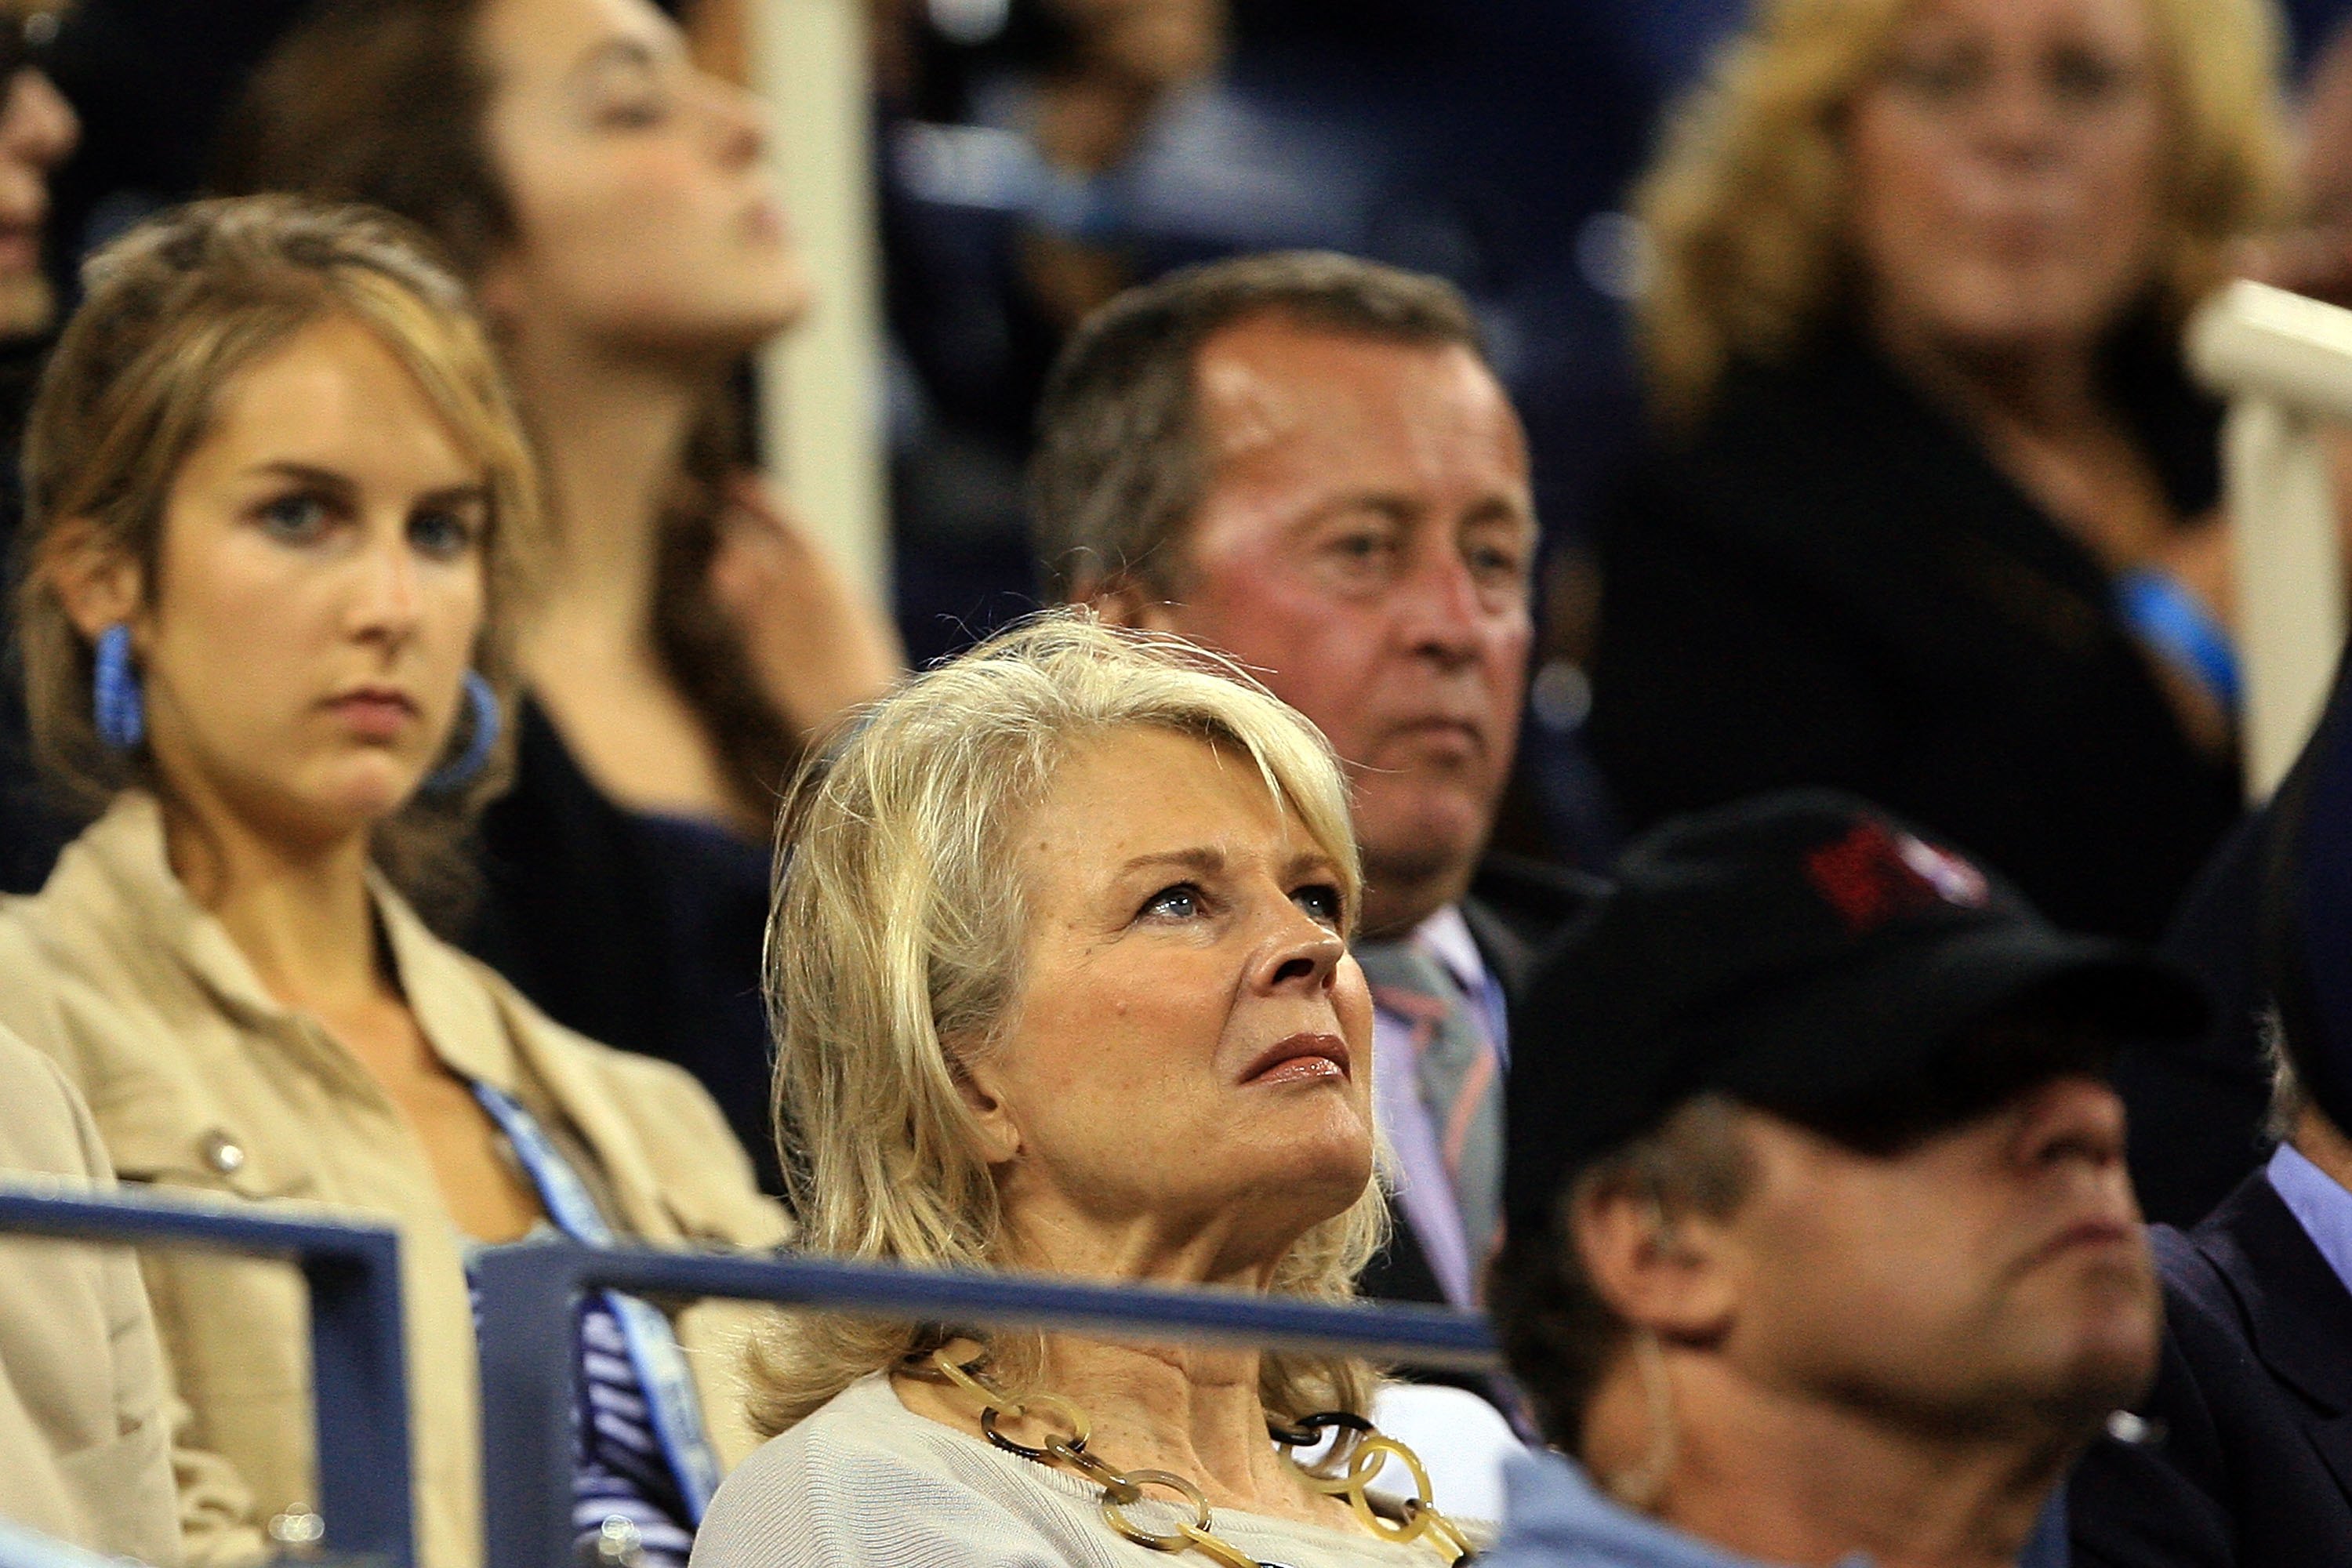 Candice Bergen at the U.S. Open at the USTA Billie Jean King National Tennis Center in Flushing Meadows Corona Park on September 6, 2006 | Source: Getty Images